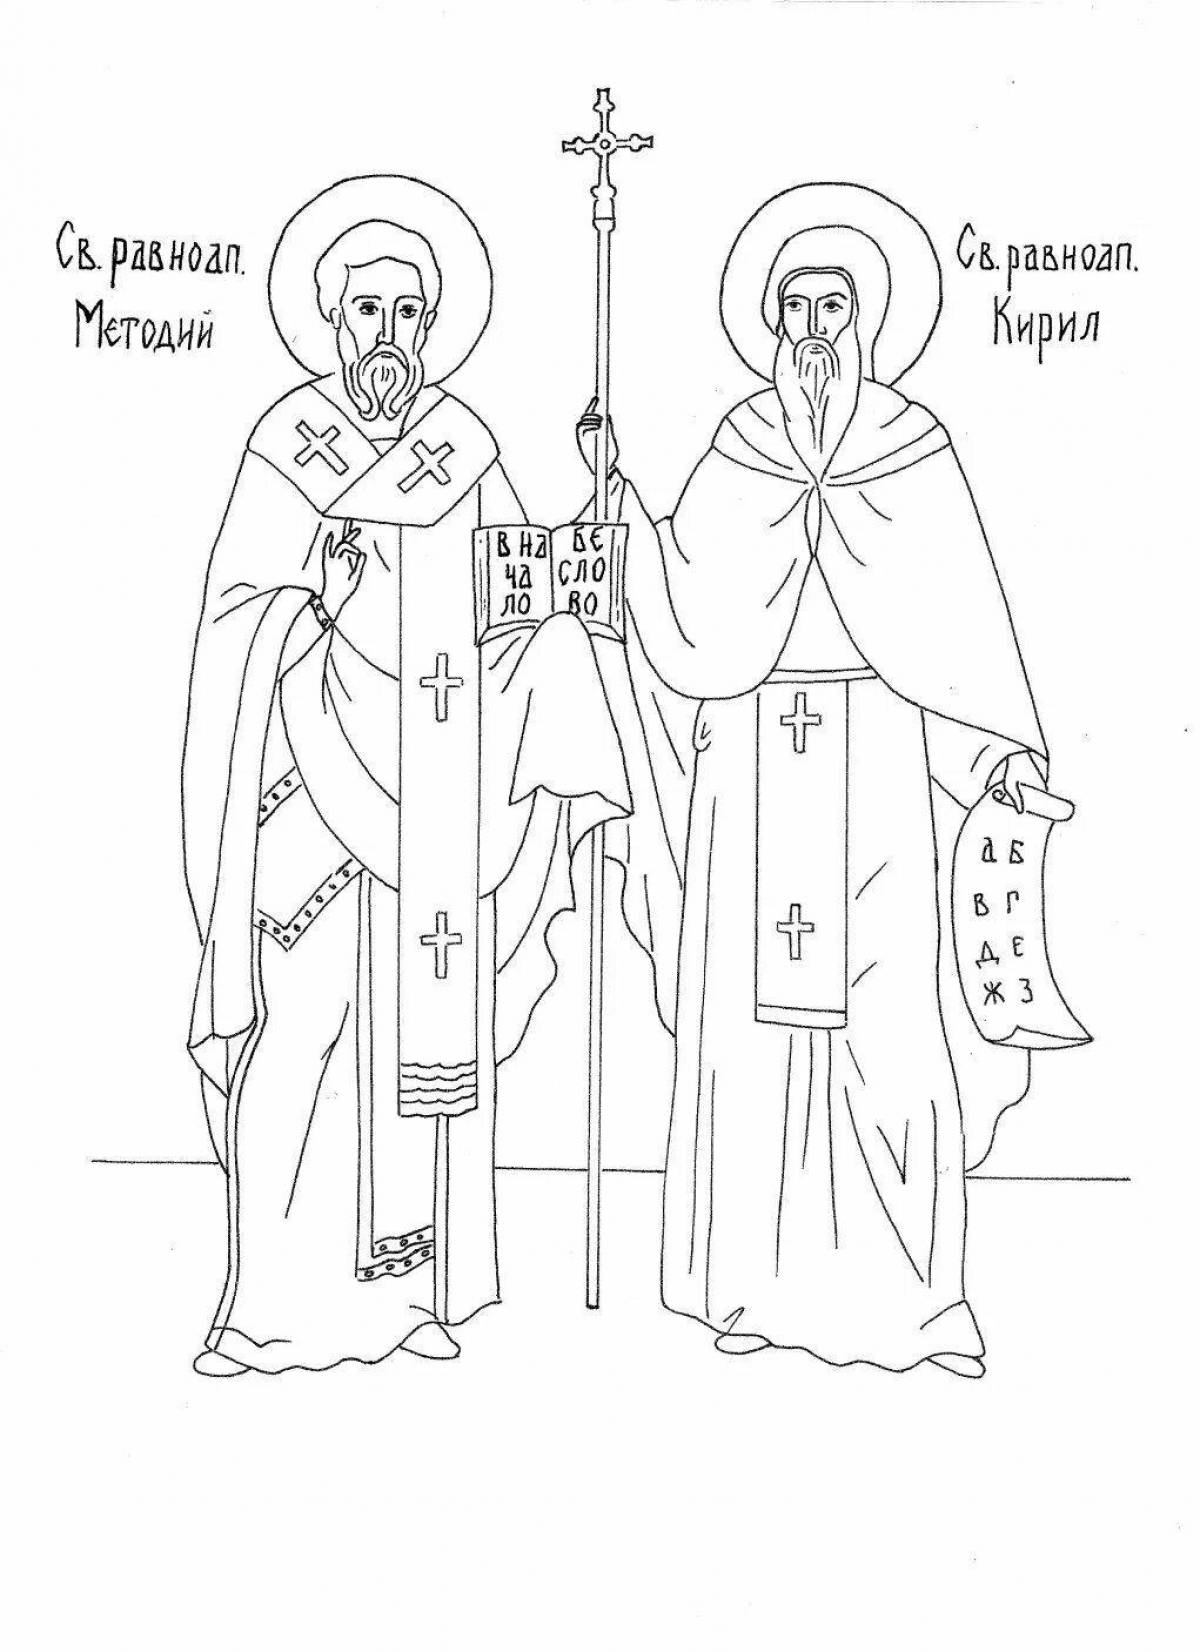 Coloring page playful cyril and methodius